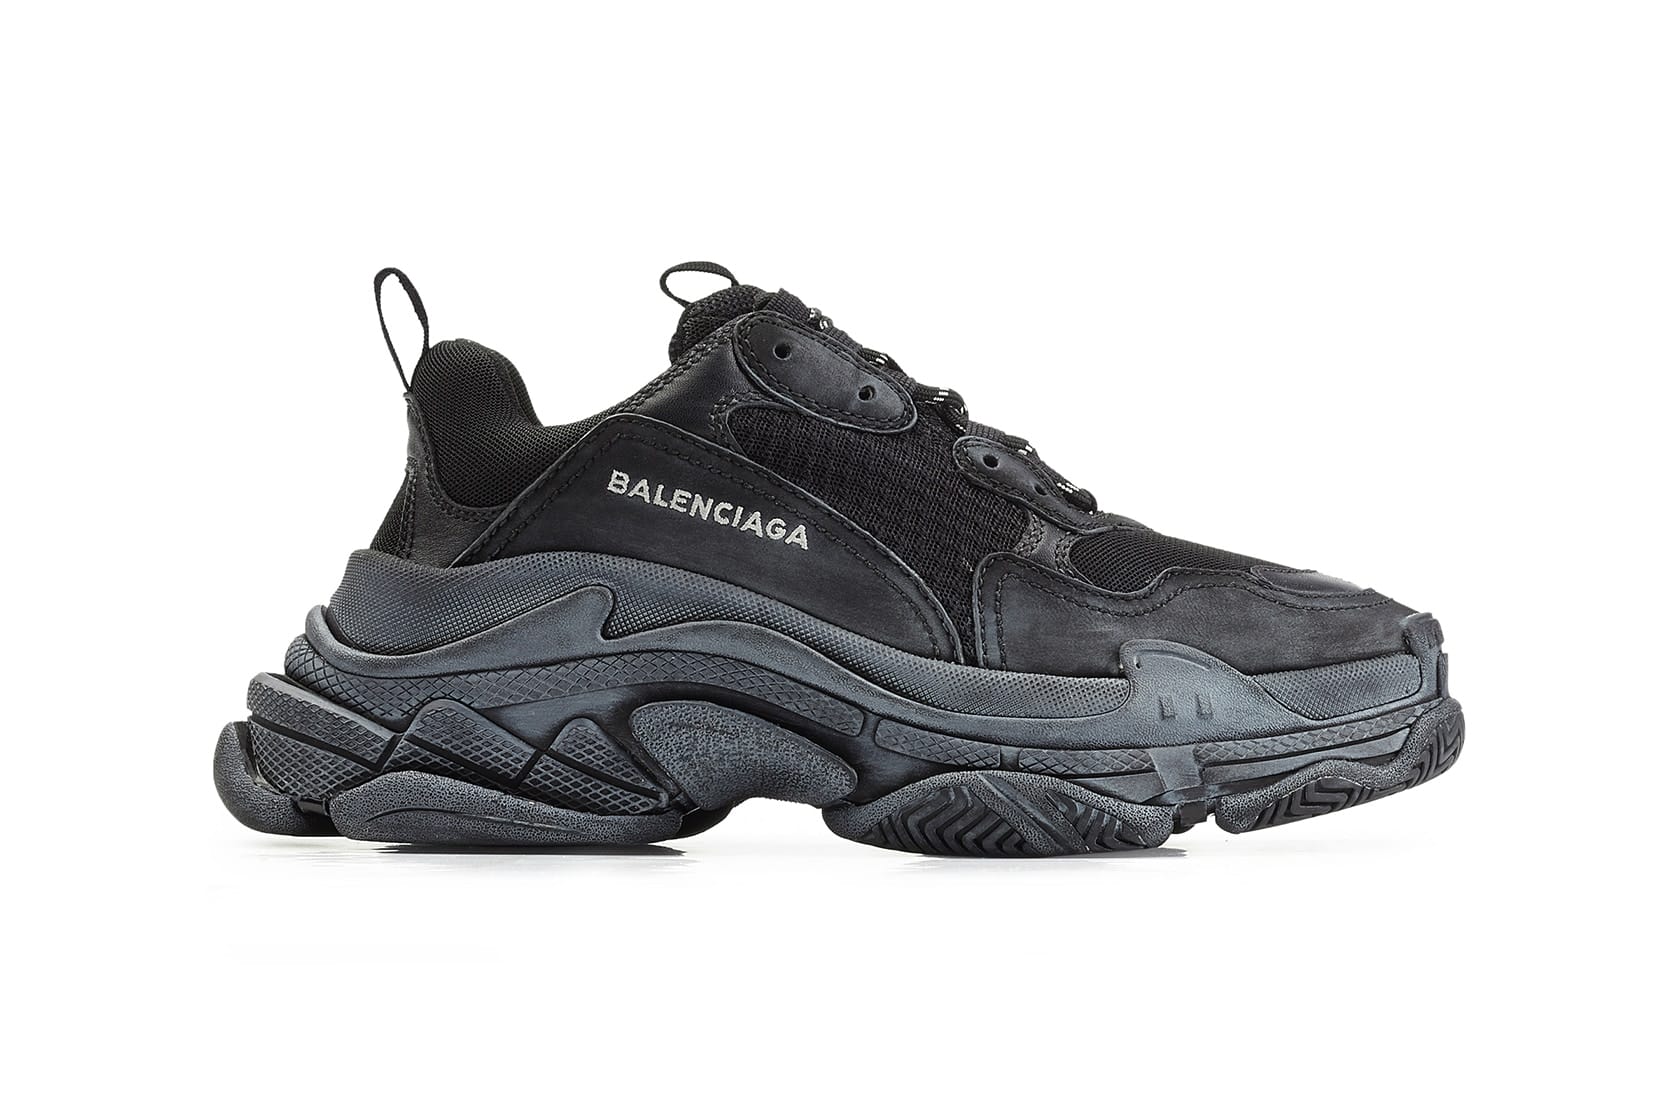 Balenciaga Adds a Clear Sole to the Triple S SportAccord